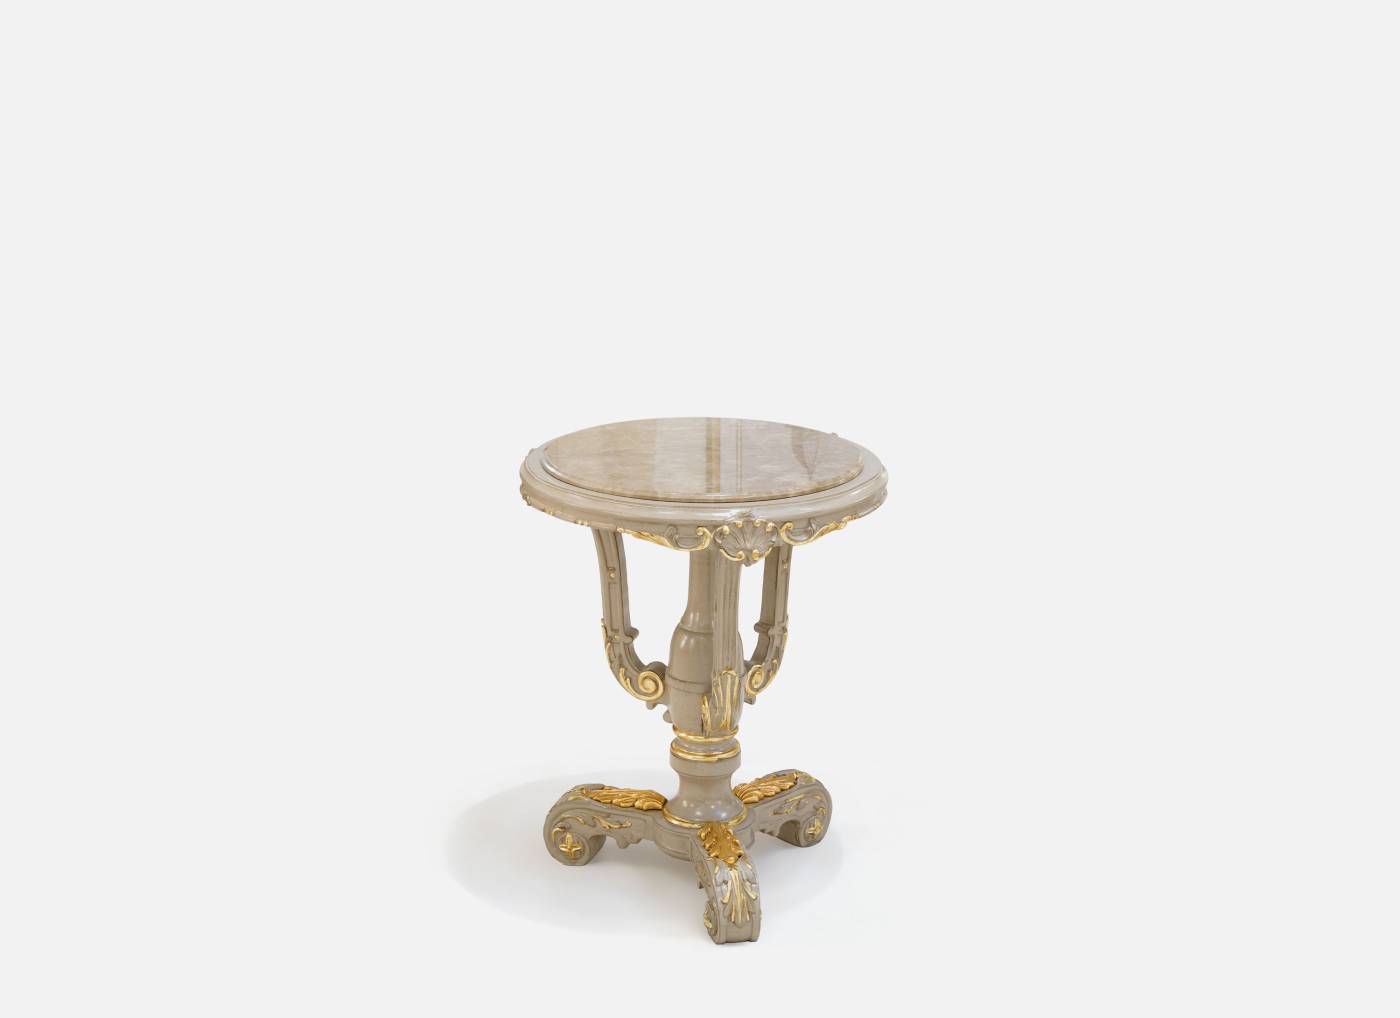 ART. 663-1 – C.G. Capelletti Italian Luxury Classic Small tables. Transform your space with sophisticated made in italy classic interior design.